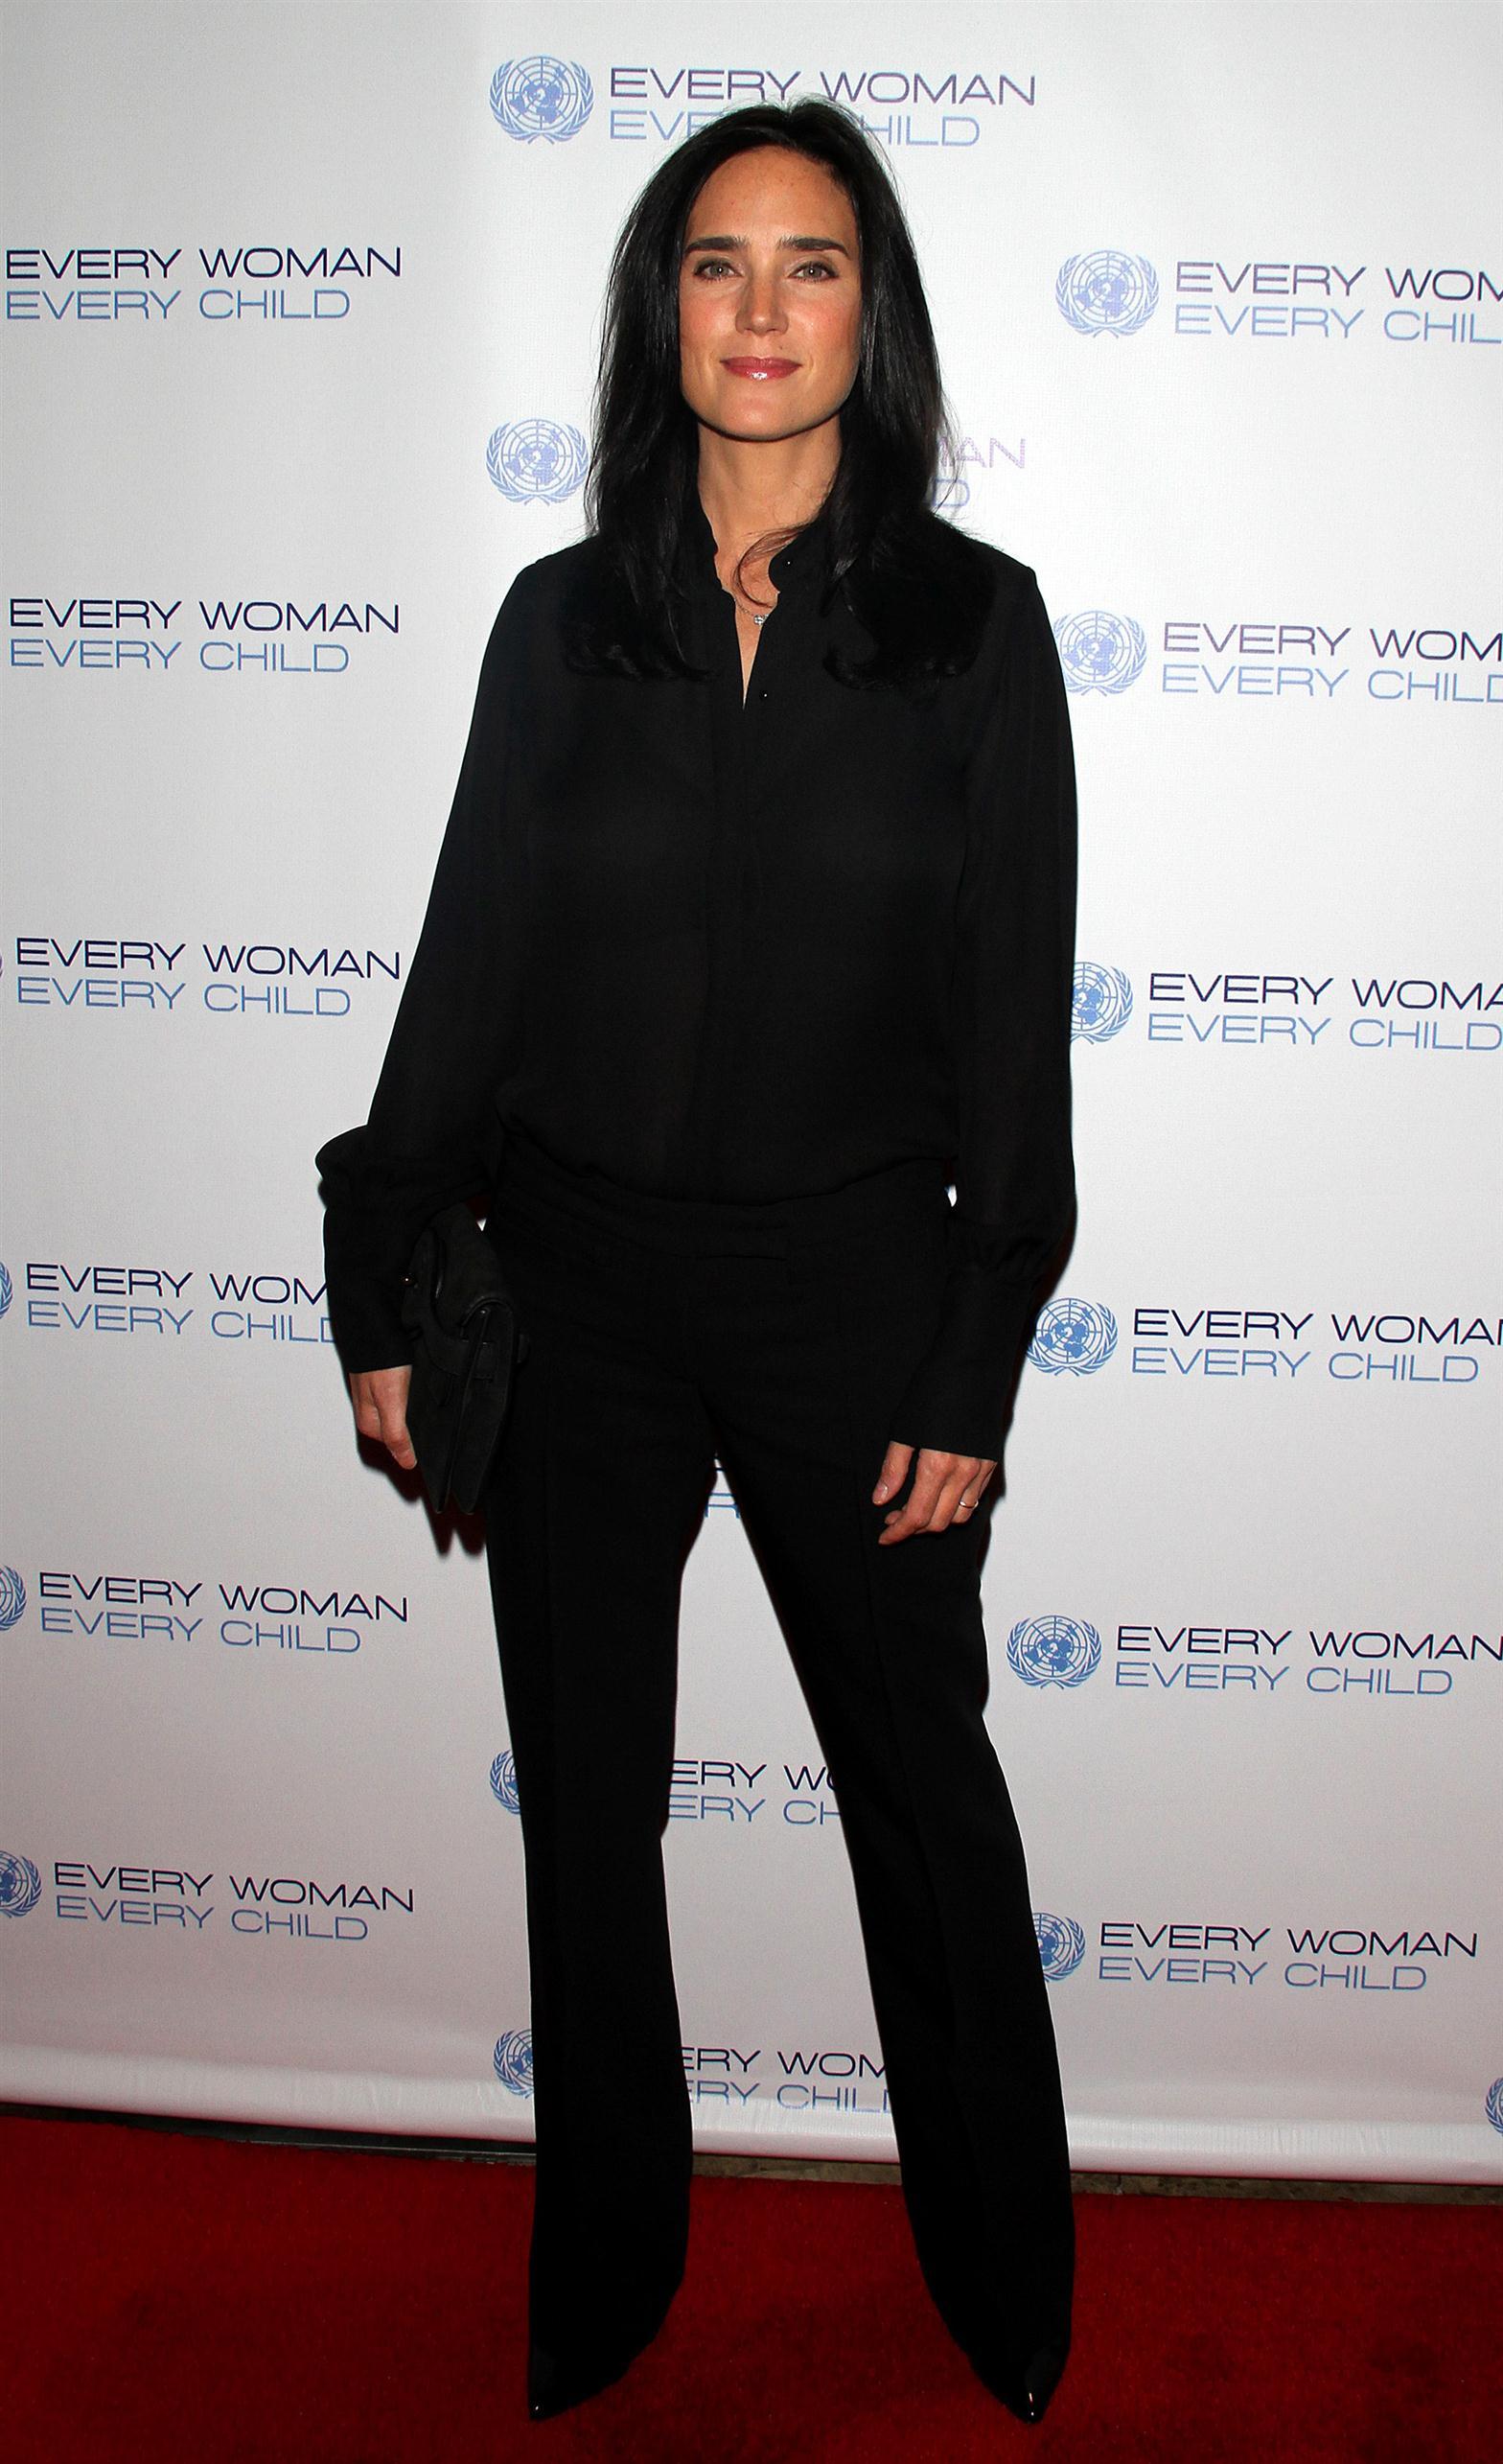 Jennifer Connelly - Every Woman Every Child MDG Reception at the Grand Hyatt Hotel | Picture 83695